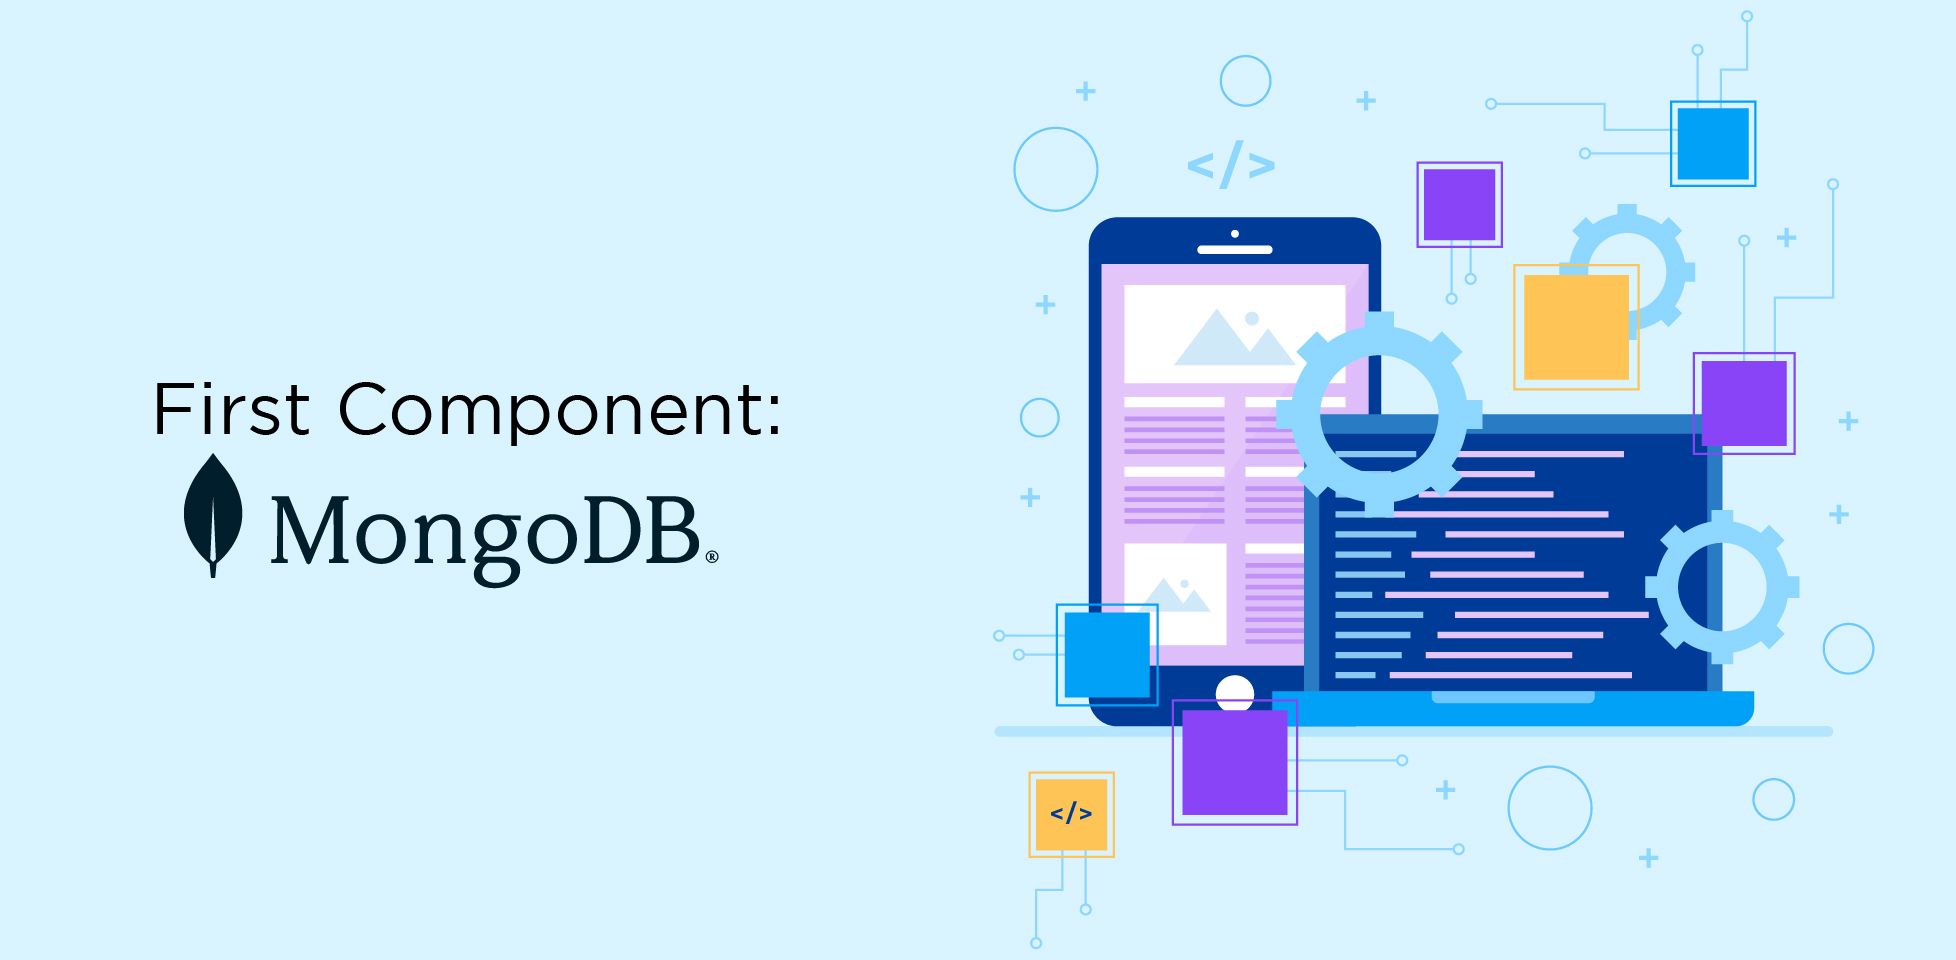 The first component: MongoDB